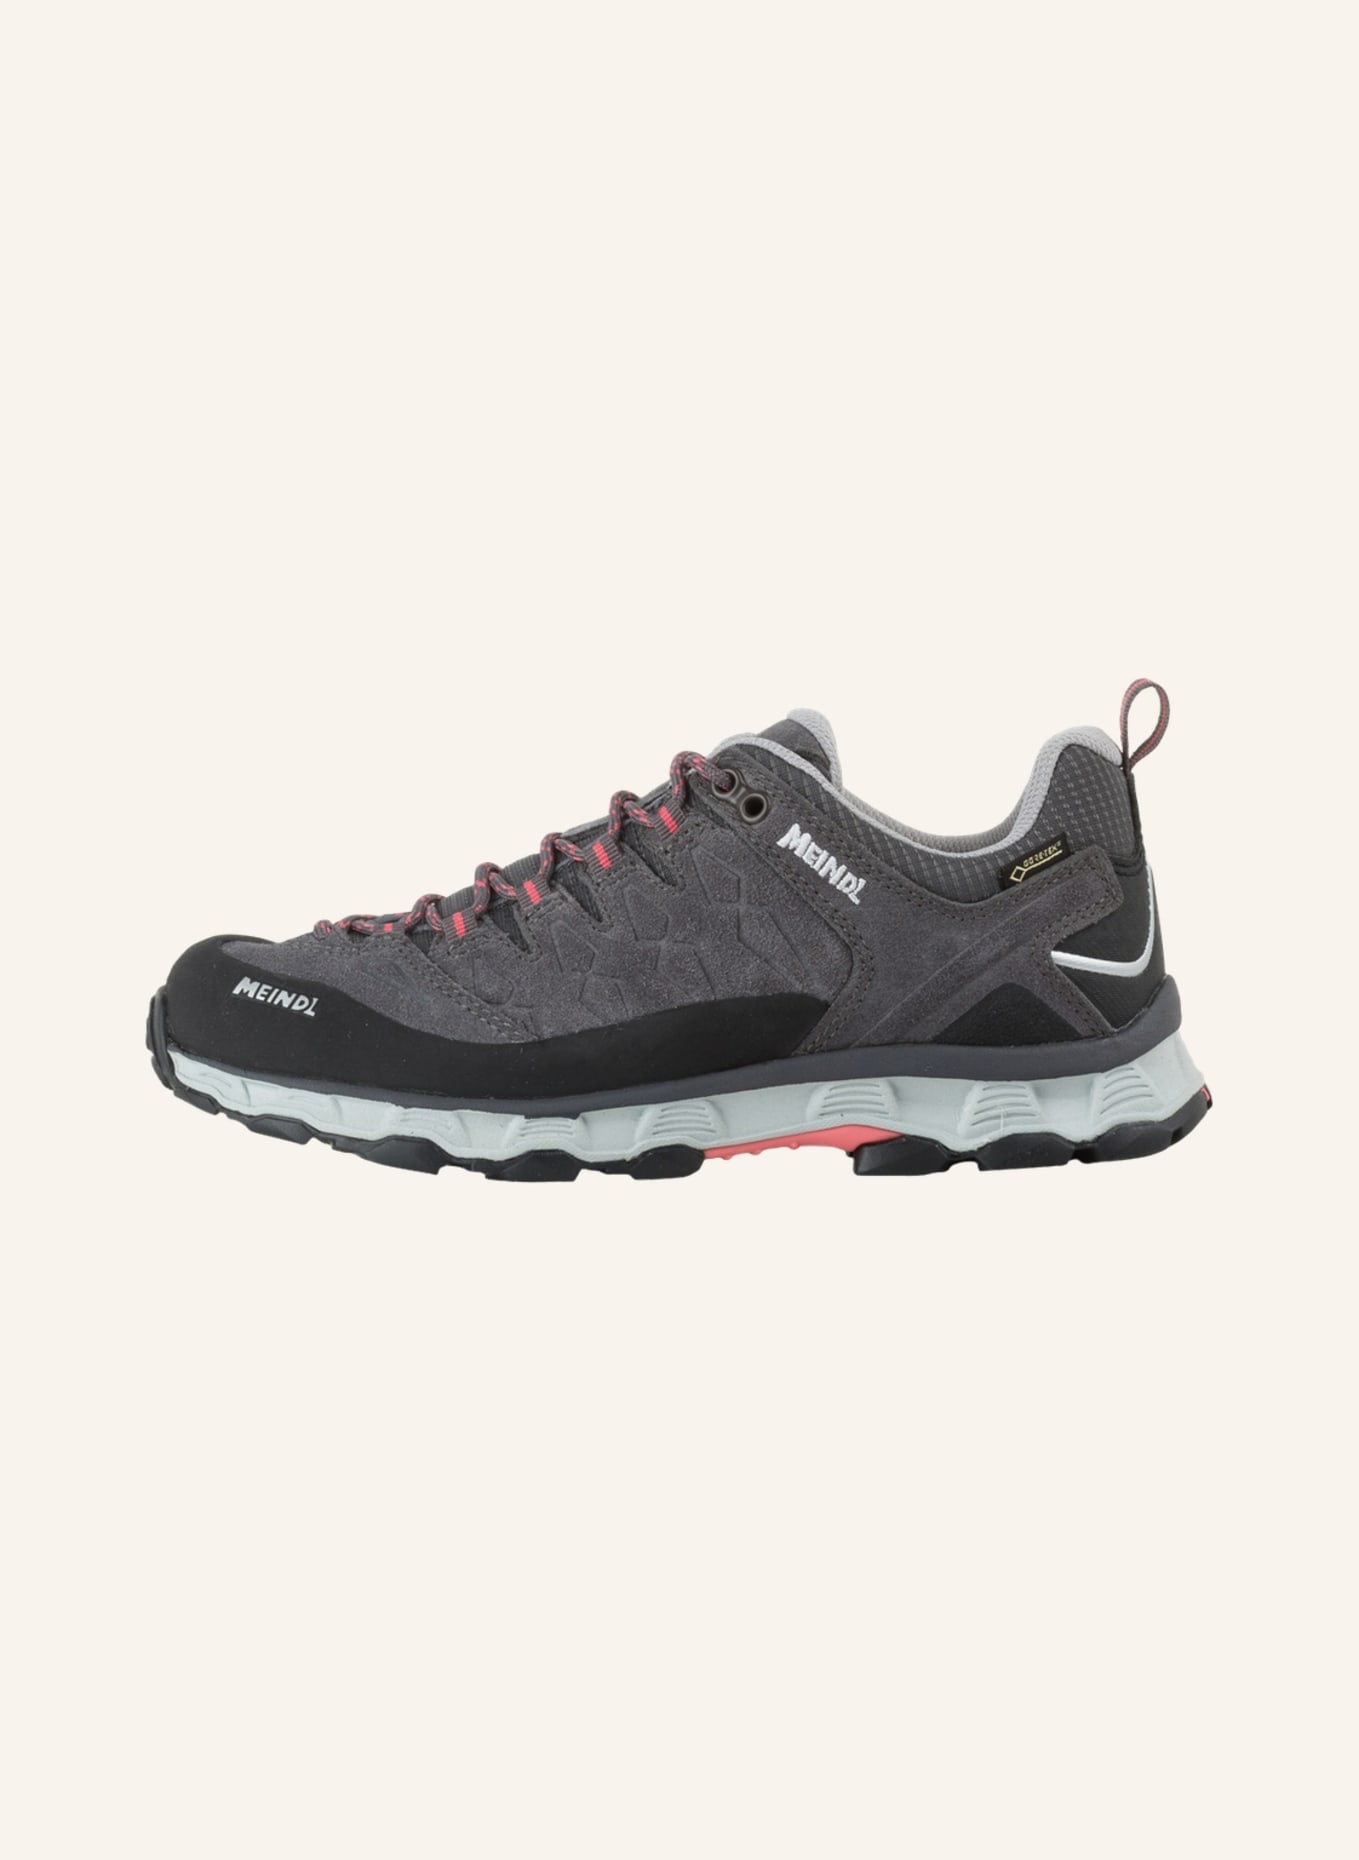 MEINDL Outdoor shoes LITE TRAIL LADY GTX, Color: GRAY (Image 4)